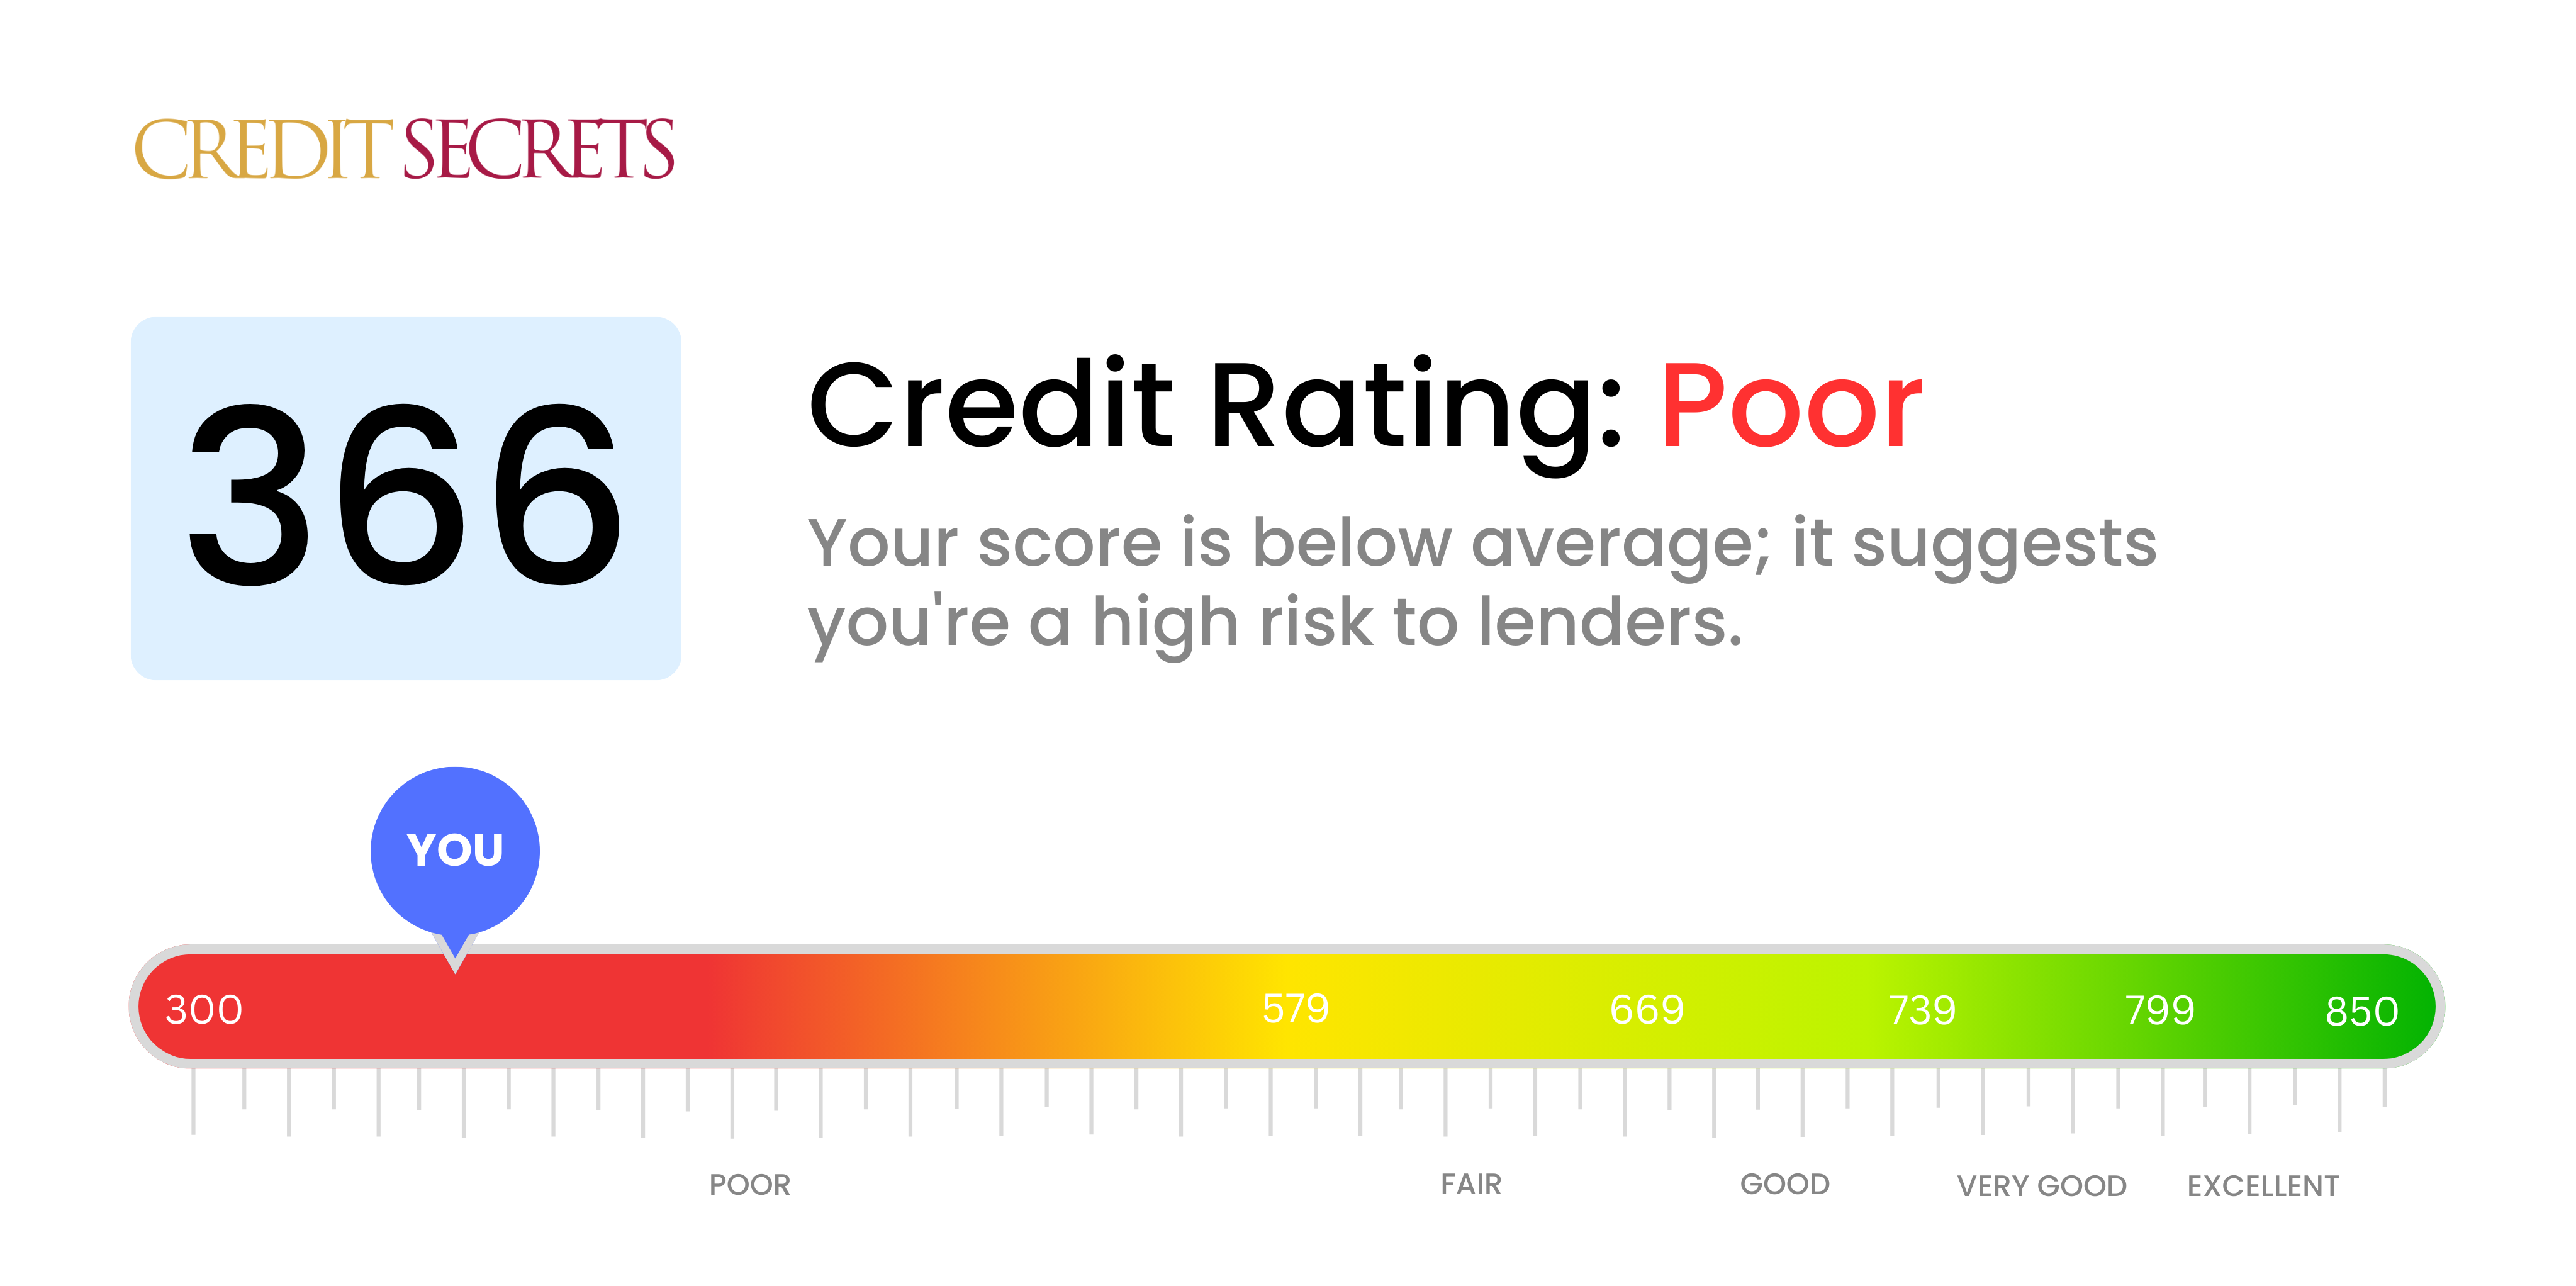 Is 366 a good credit score?